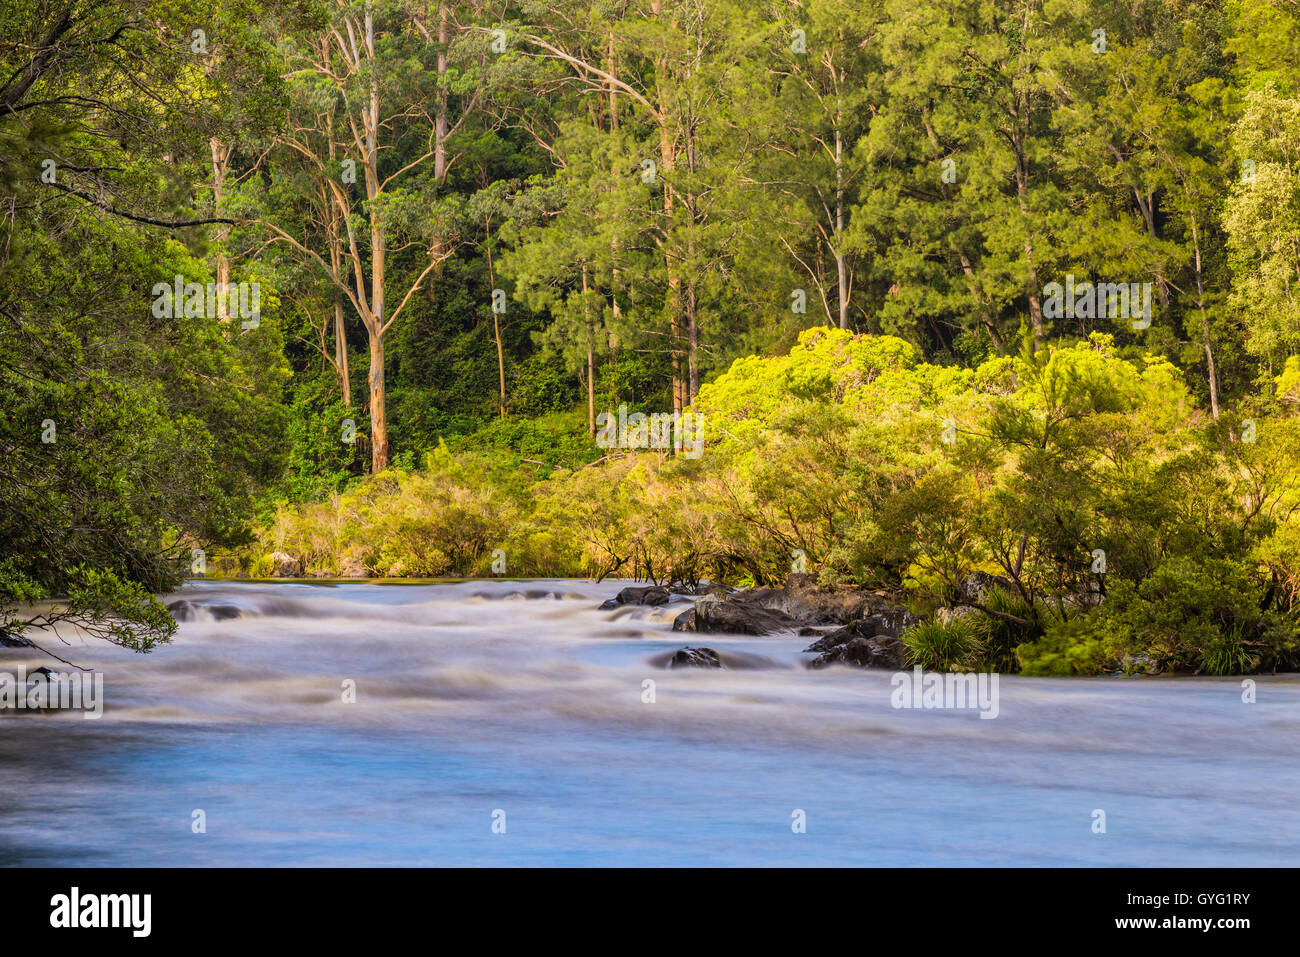 Scenic view of raging river flowing through forest Stock Photo